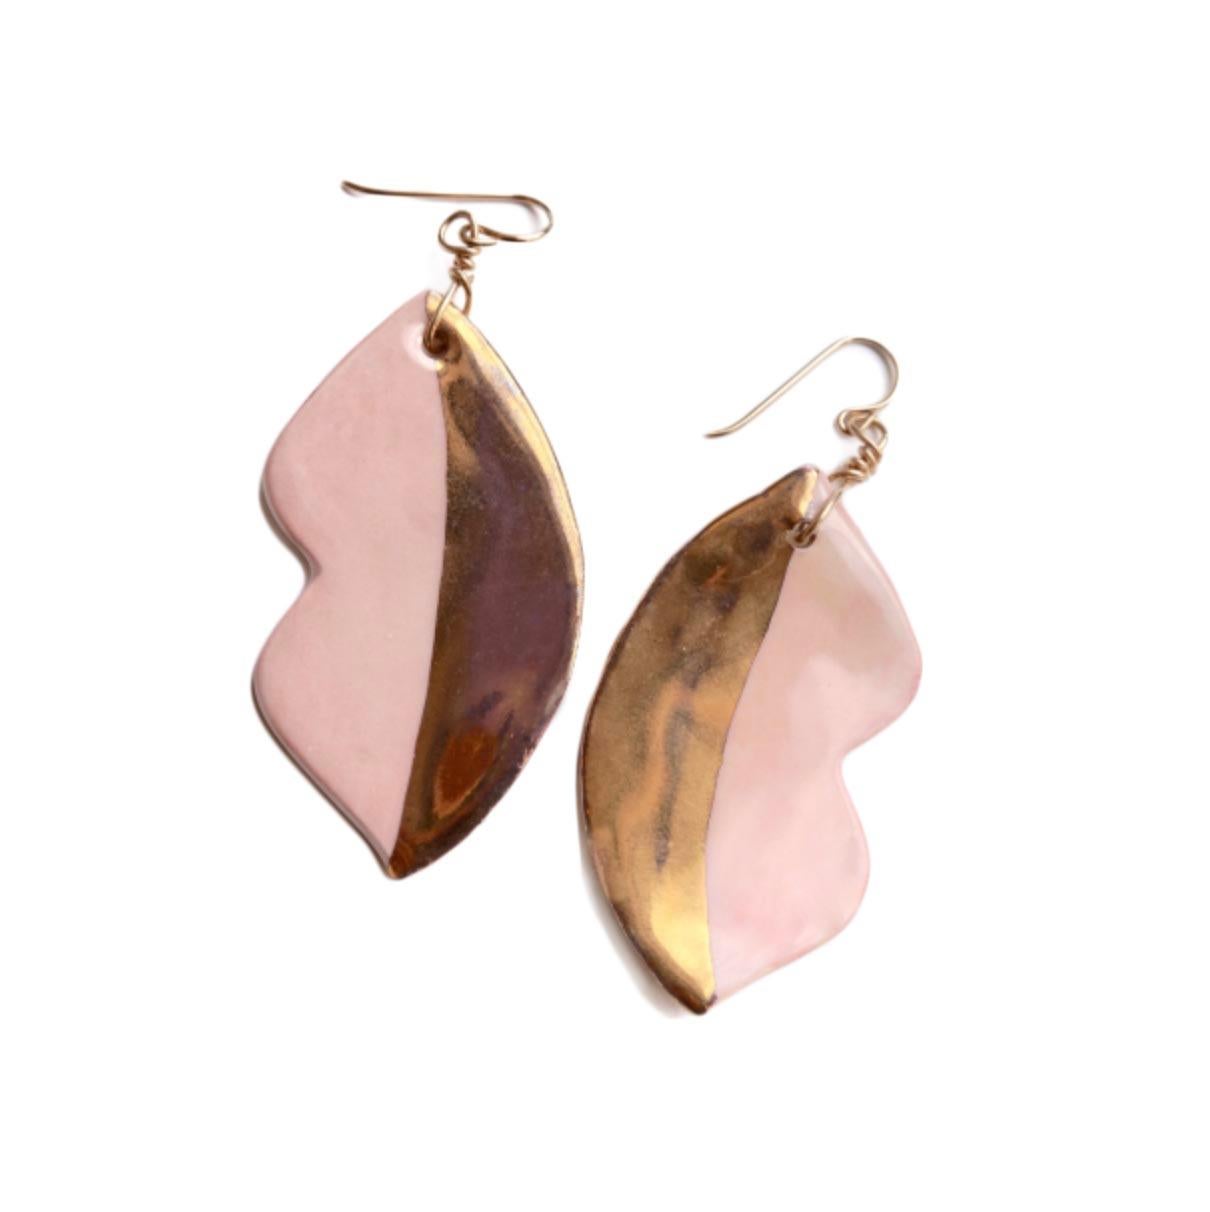 Handcrafted earrings in porcelain, painted in our 
bright custom made glaze and 14k gold leaf. Hypoallergenic gold-filled ear wire.  Each piece is hand made so slightly different from each other which gives our jewelry its unique look. Sold as a